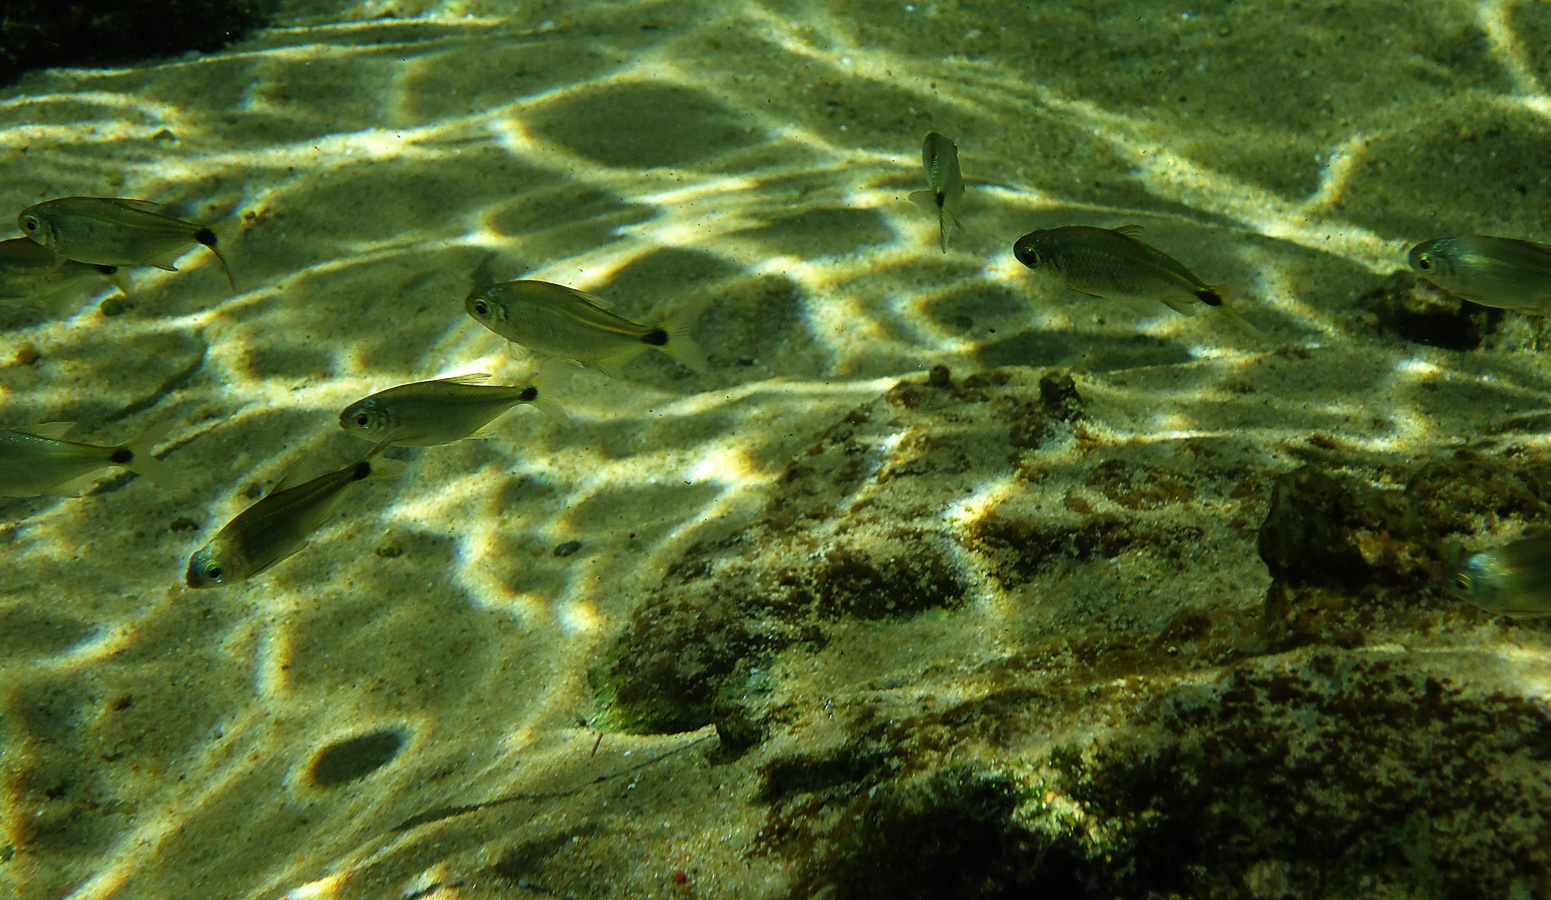 Snorkeling in the cristal clear water near Bonito [15.63 mm, 1/250 sec at f / 5.0, ISO 80]